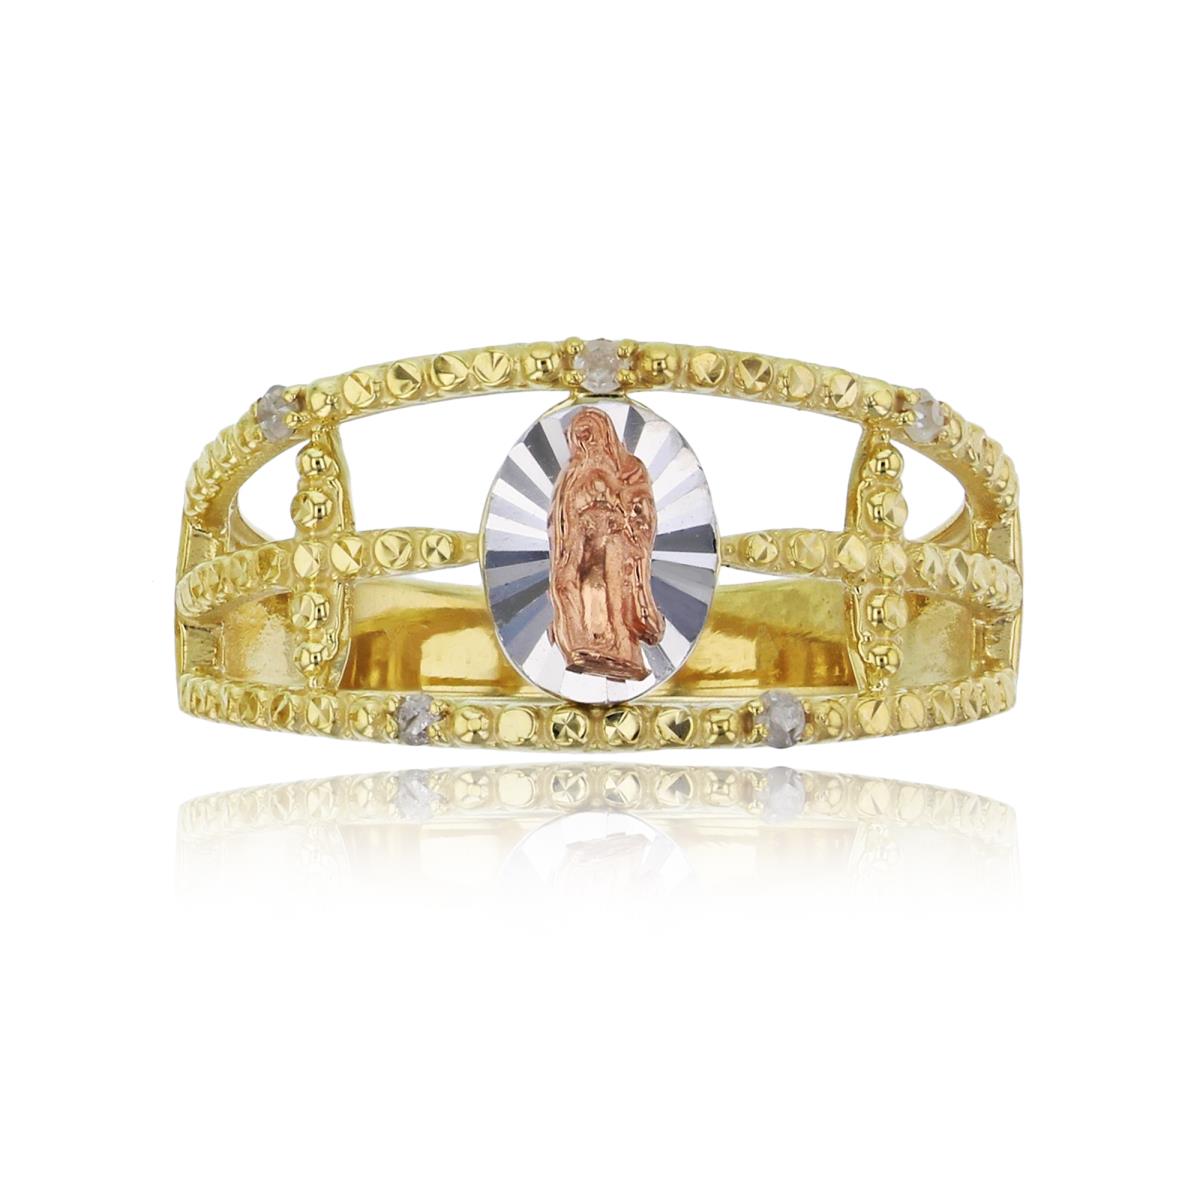 14K Tricolor Gold 0.05 Diamond Accent 3-Strand Milgrain Polished & DC Virgin Mary Religious Ring